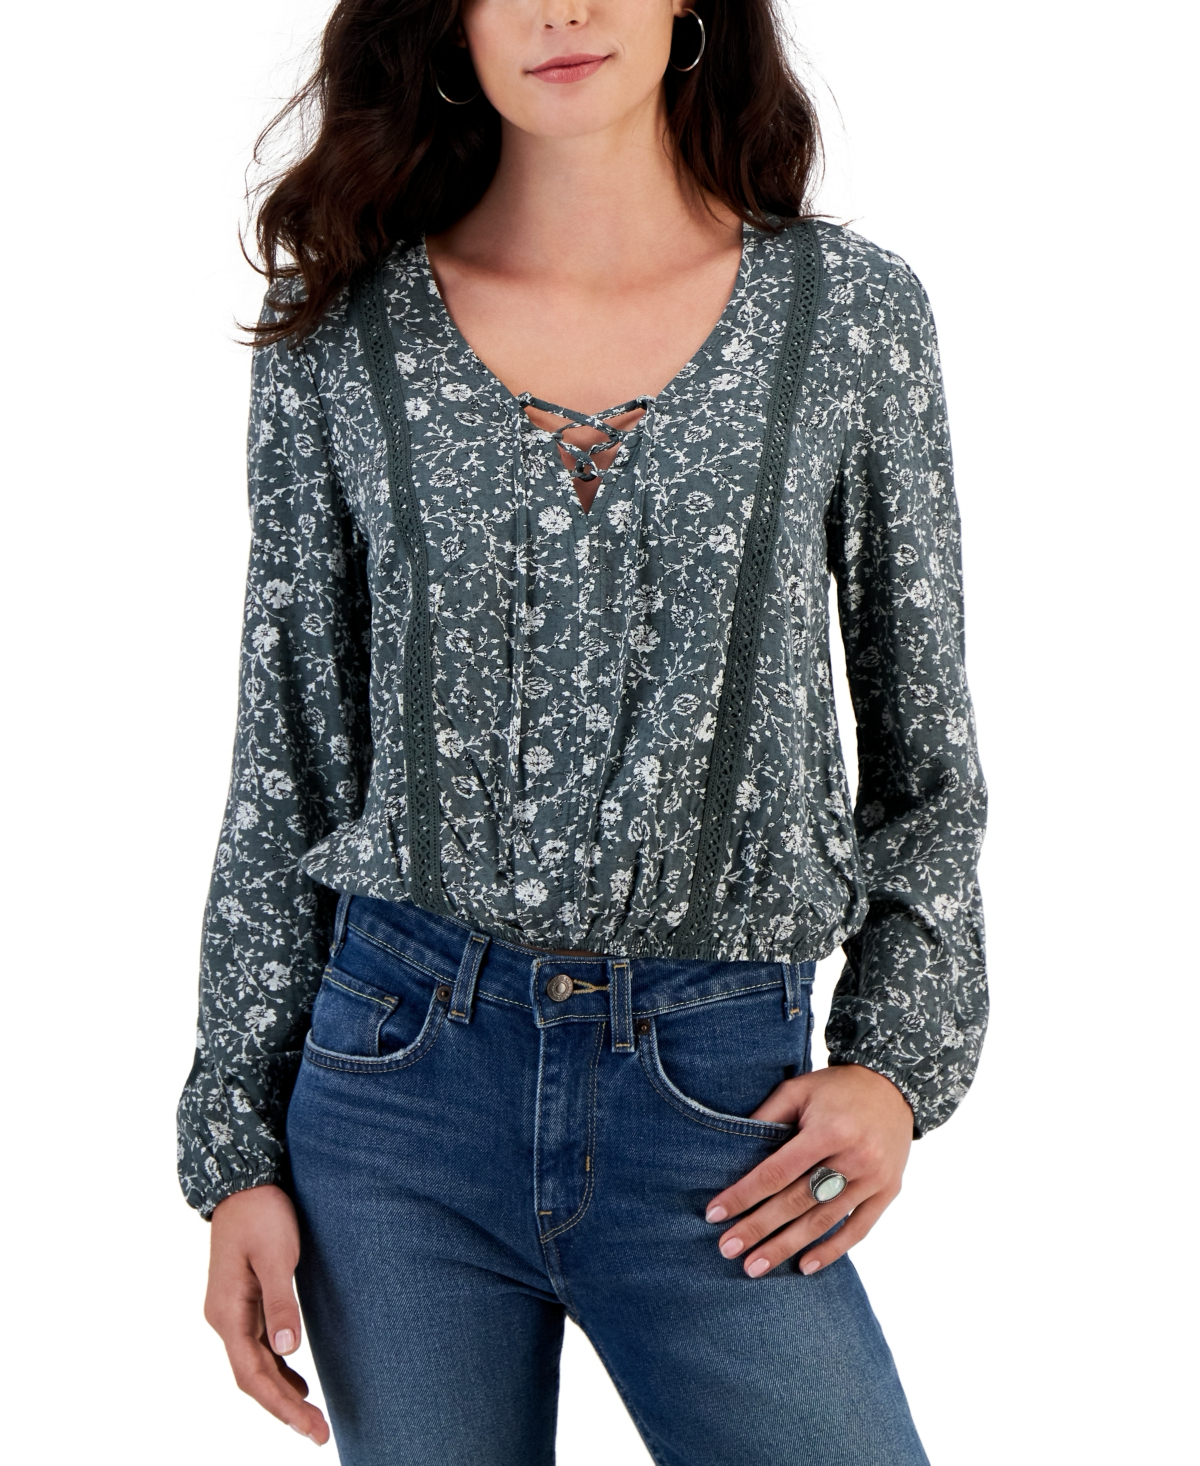 JUNIORS' LACE-UP V-NECK CROCHET-TRIMMED TOP IN THYME Touches of peasant inspiration accent the totally pretty shape of this floral lace-up crochet-trimmed top from Self Esteem. Juniors Juniors' Clothing - Tops